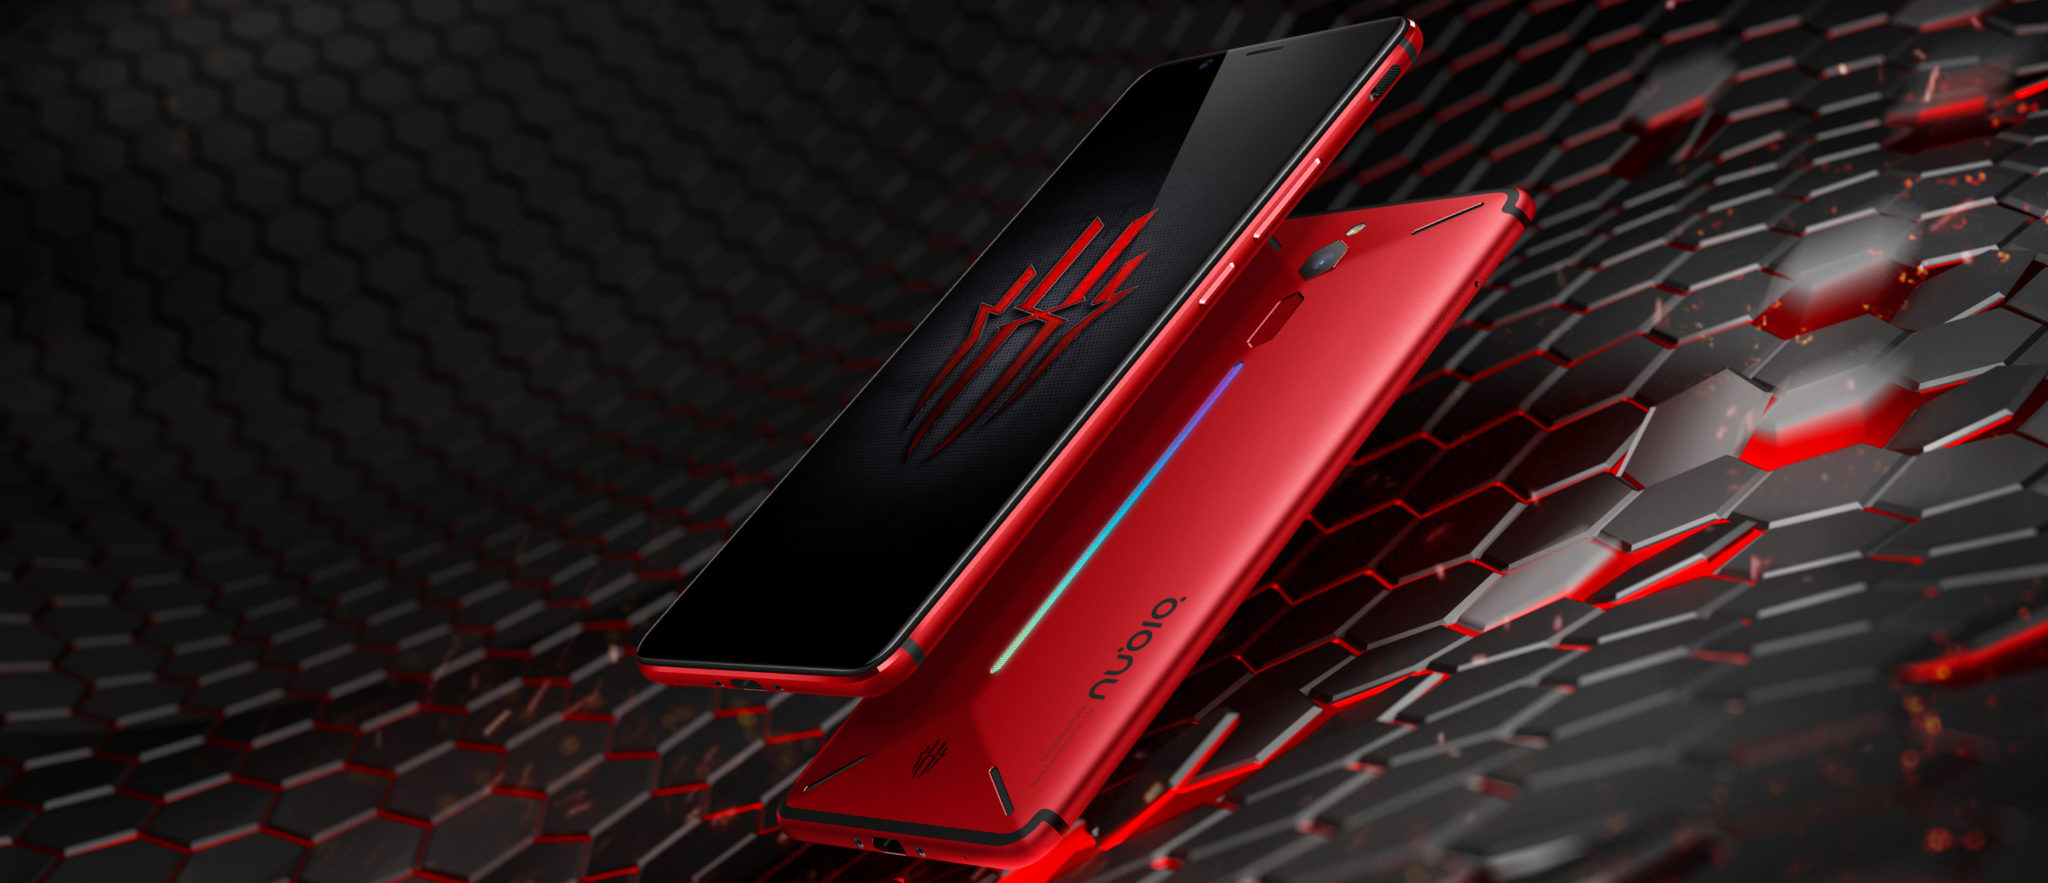 officially announced phone games nubia red magic with impressive design